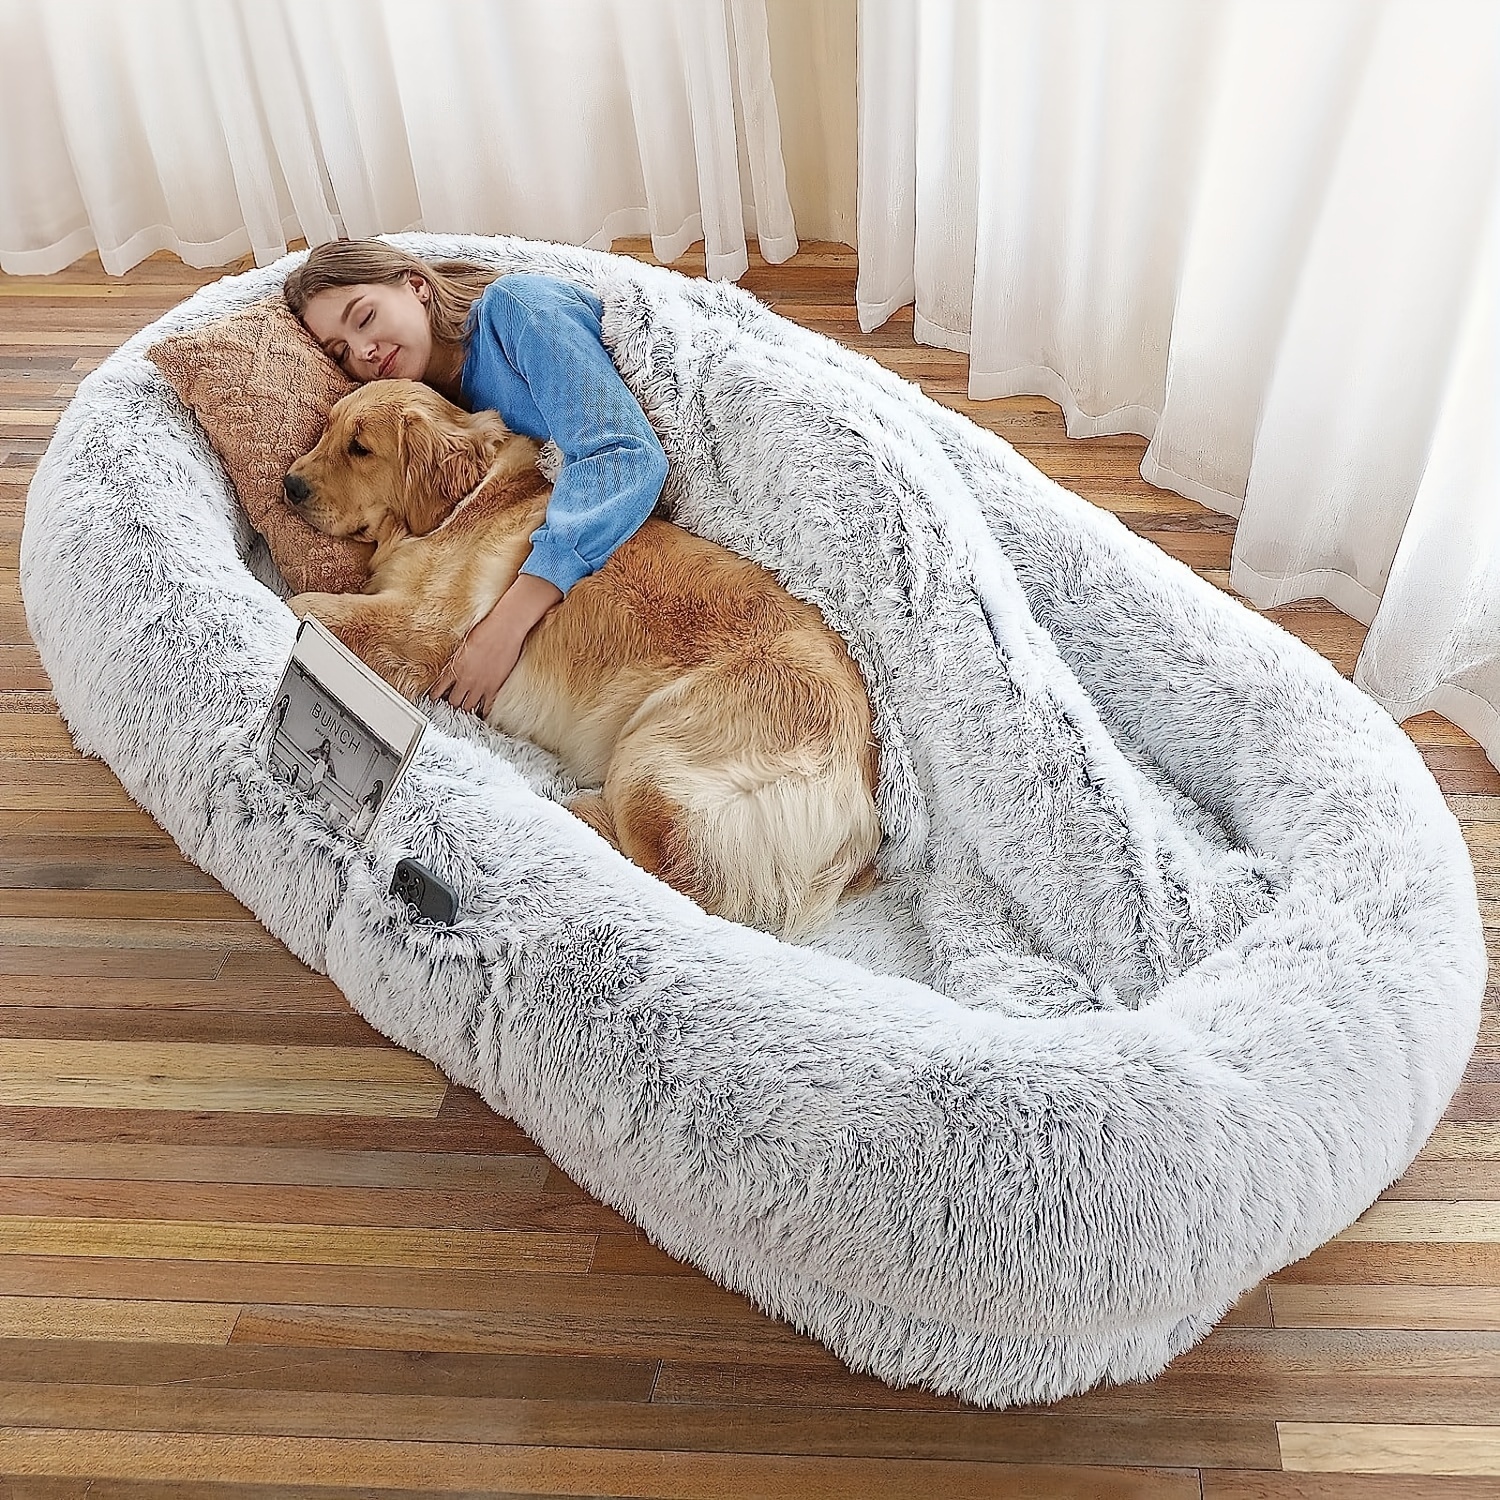 

Bed, 71''x45''x12'' Size Fits You And Pets, Washable Faux Fur Dog Bed For People Off, Napping Orthopedic Dog Bed, Present Plump Pillow, Blanket, Strap - Grey